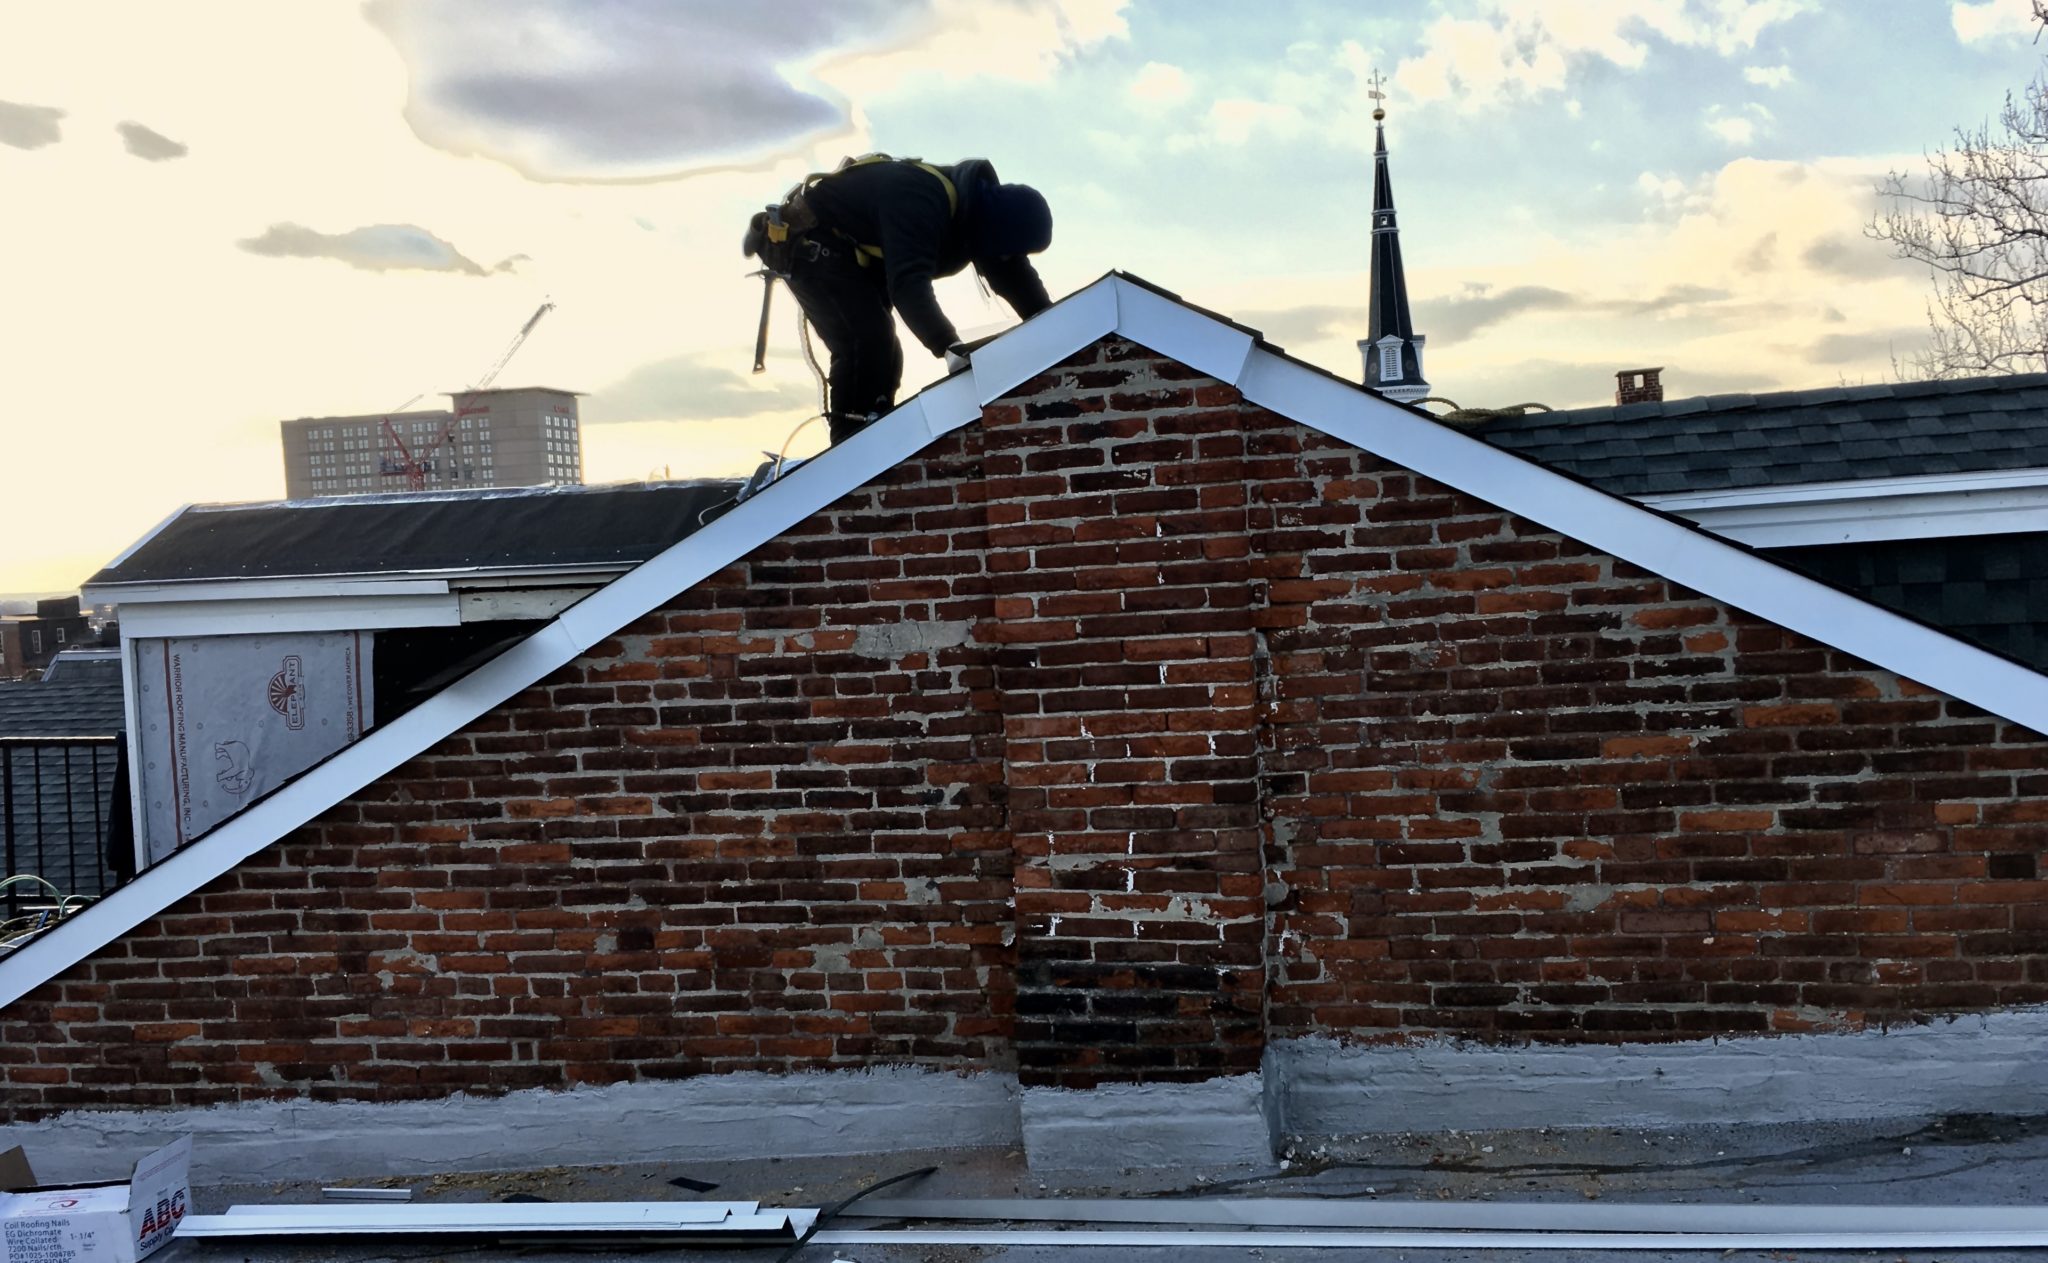 Person in safety equipment on top of a slanted roof